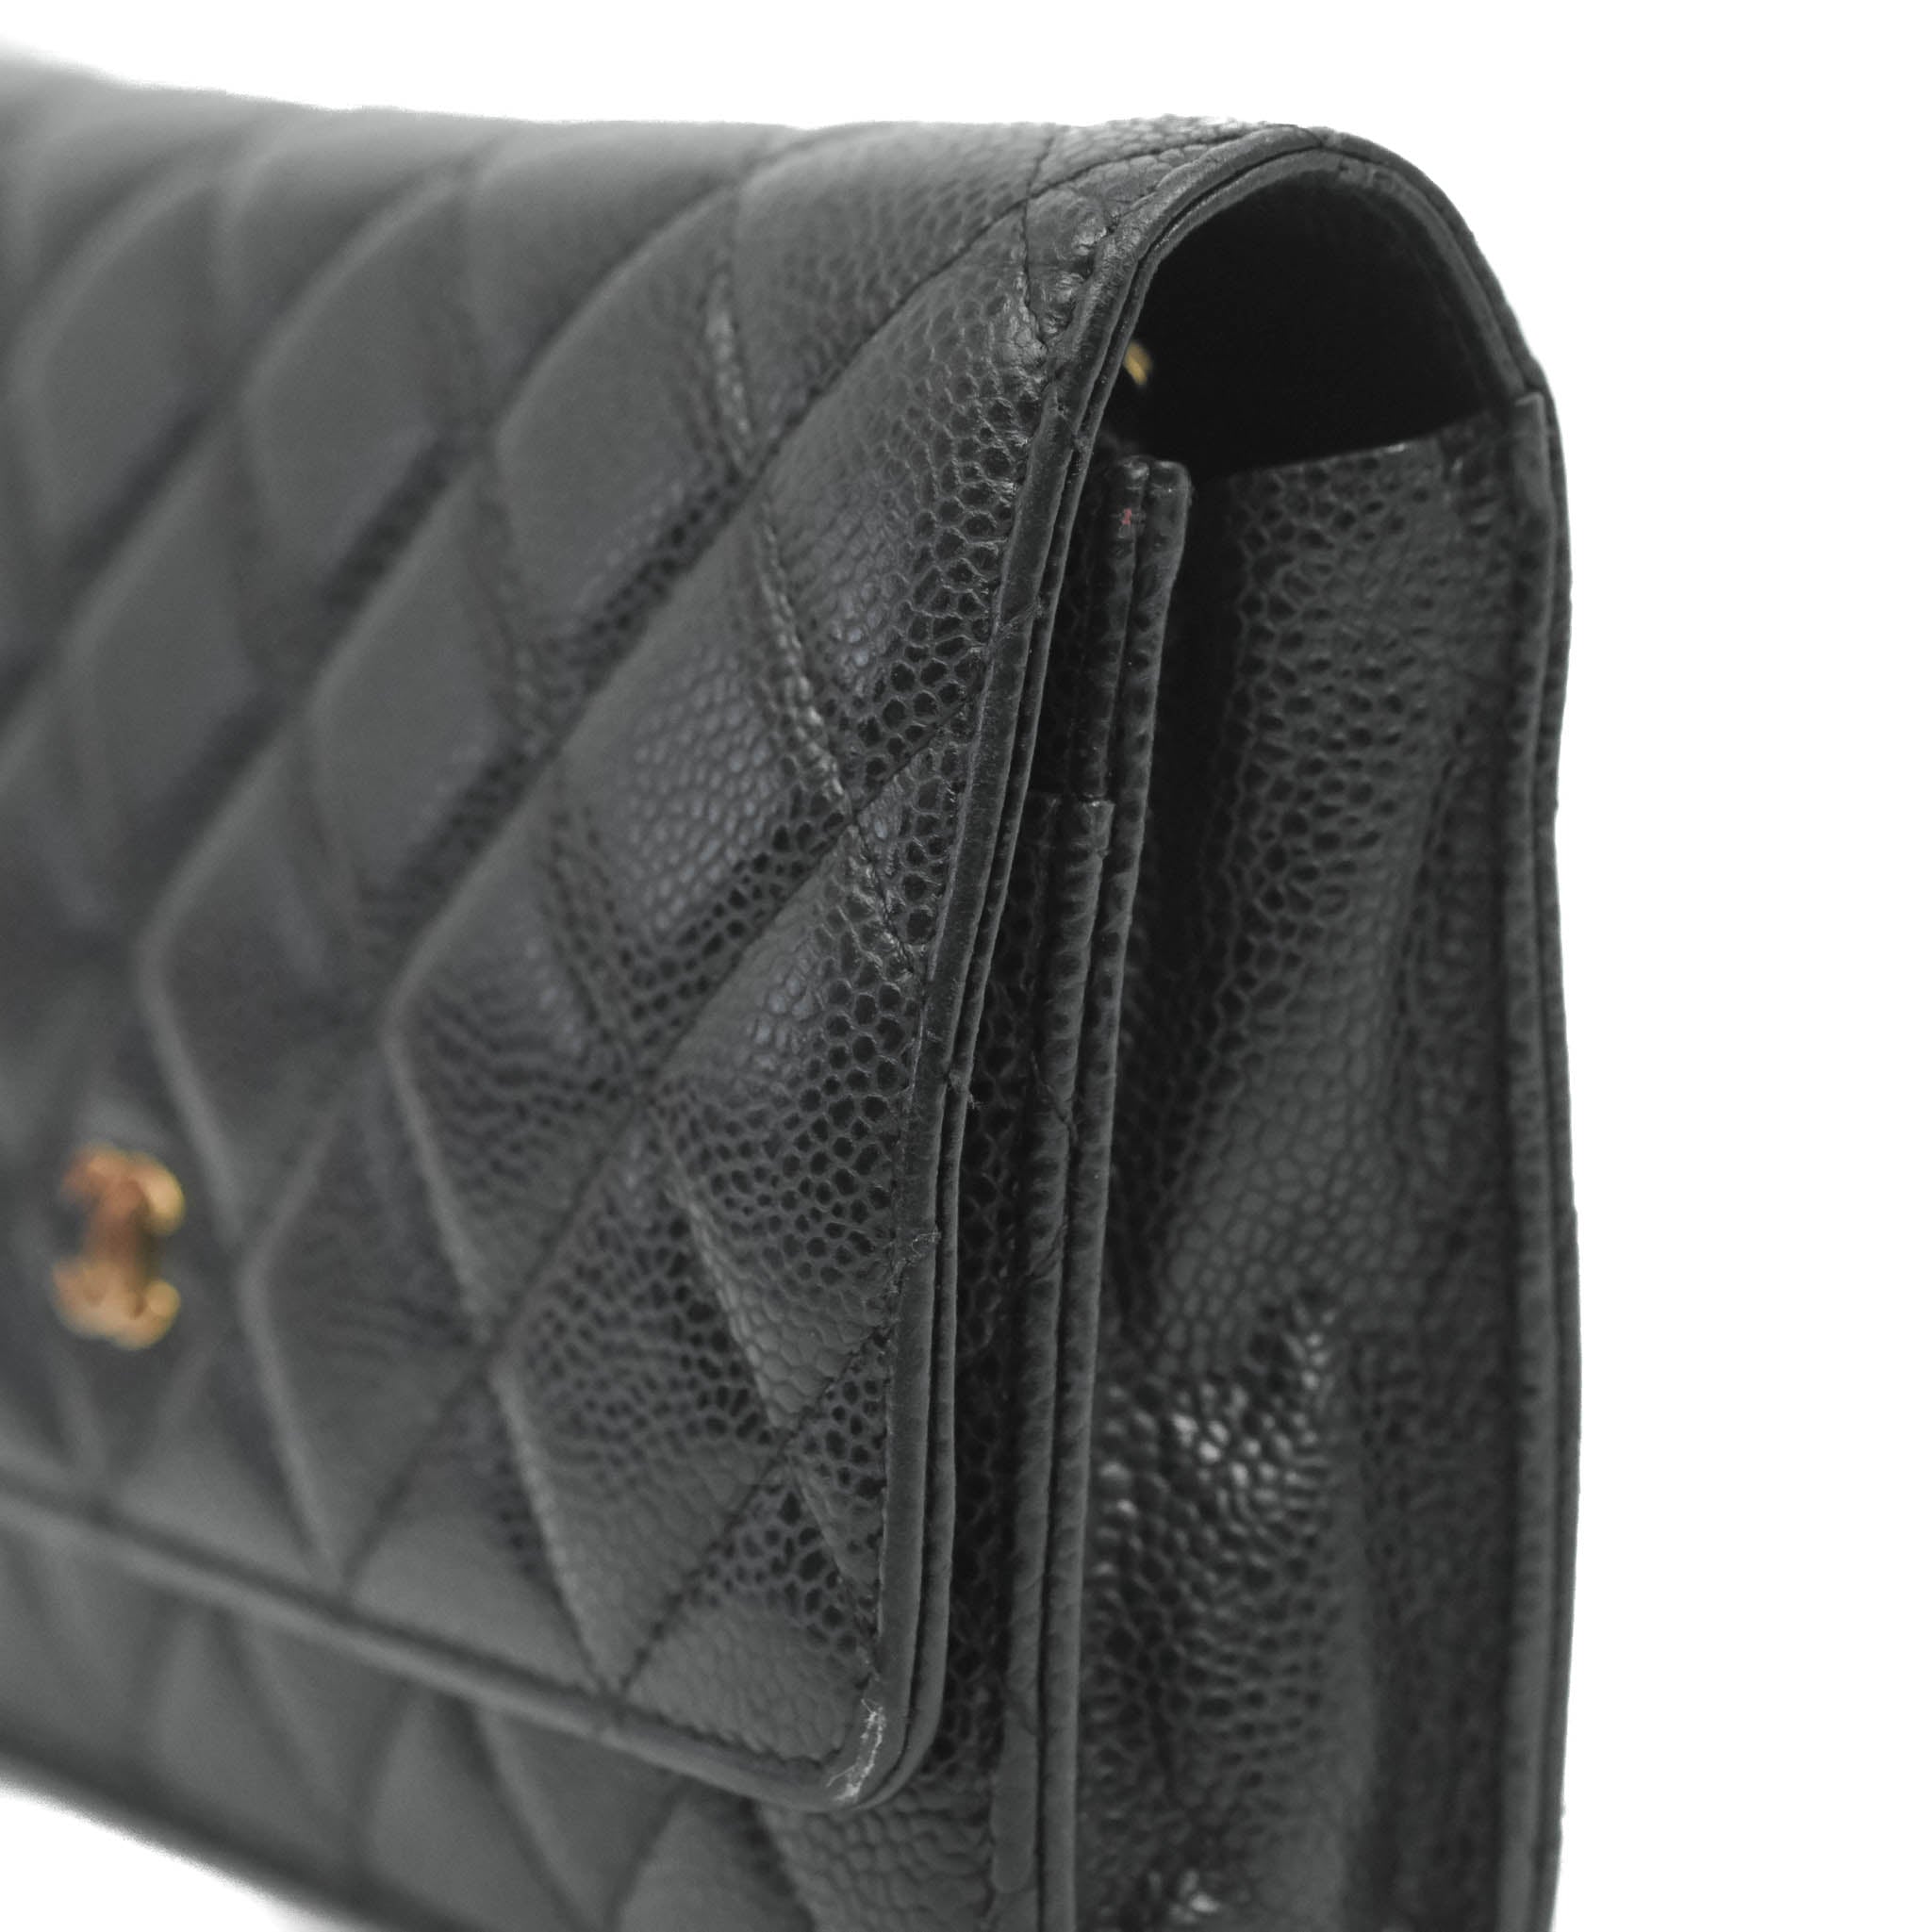 caviar quilted wallet on chain woc black